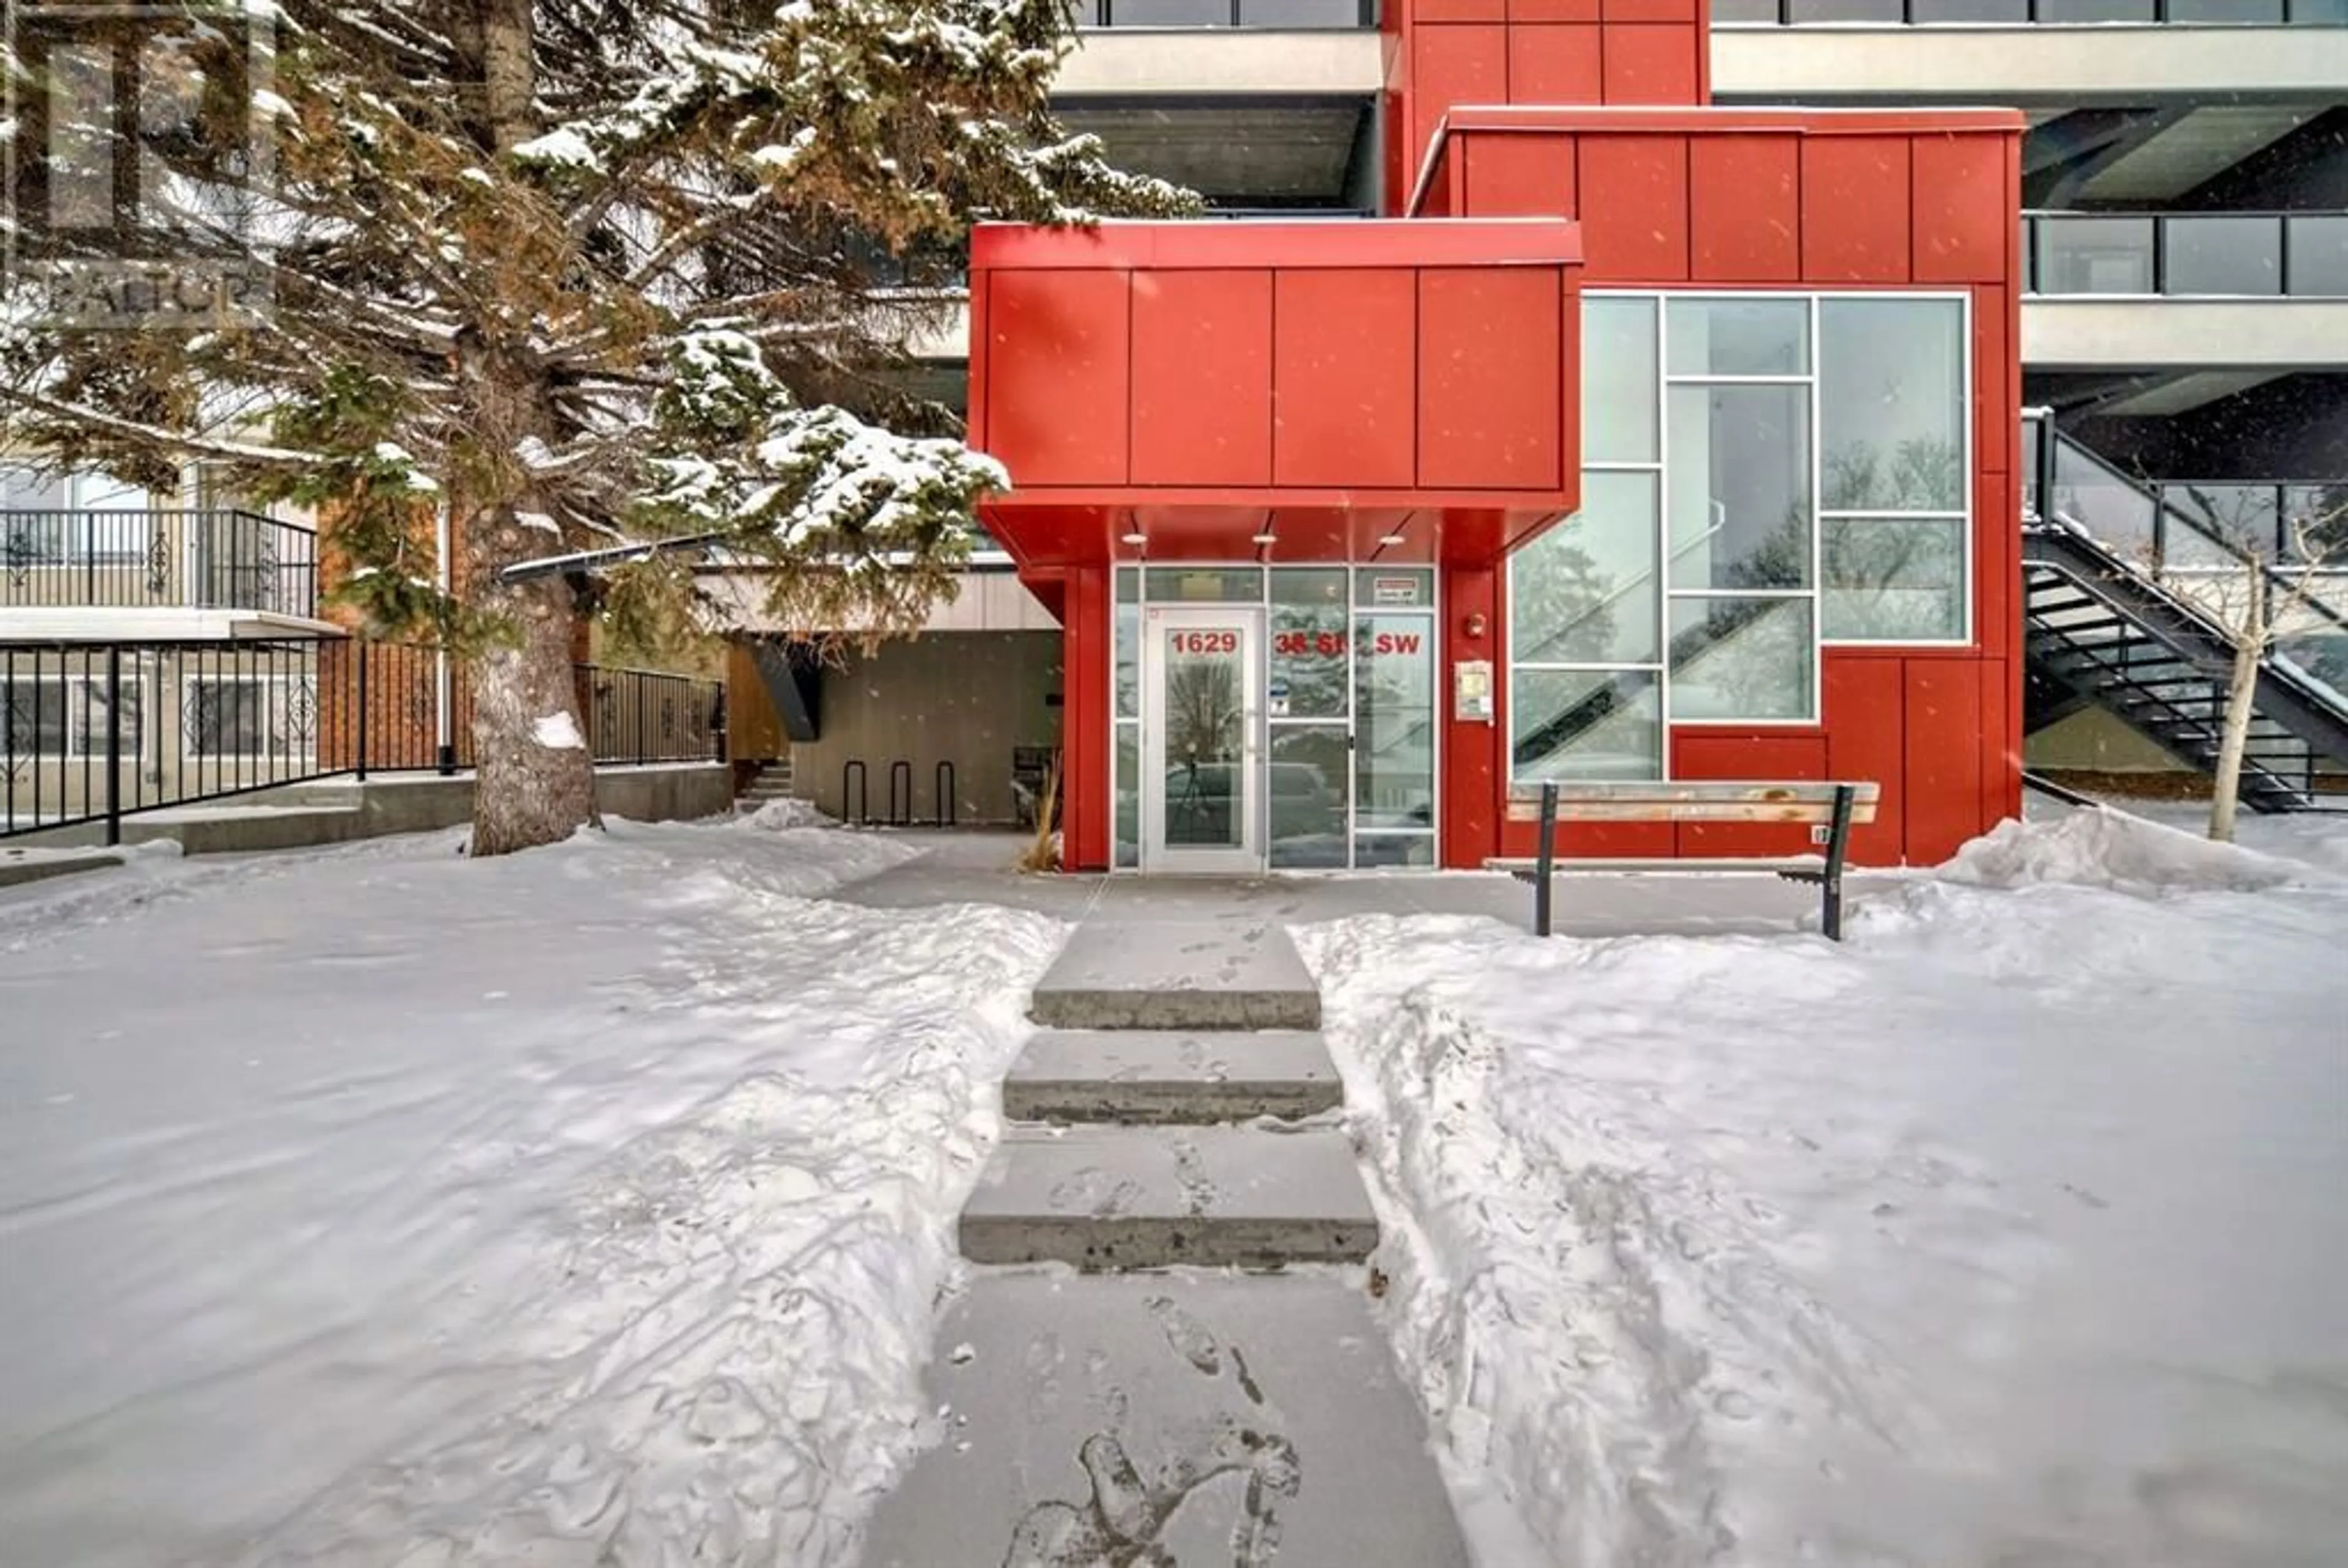 A pic from exterior of the house or condo for 304 1629 38 Street SW, Calgary Alberta T3C1T8